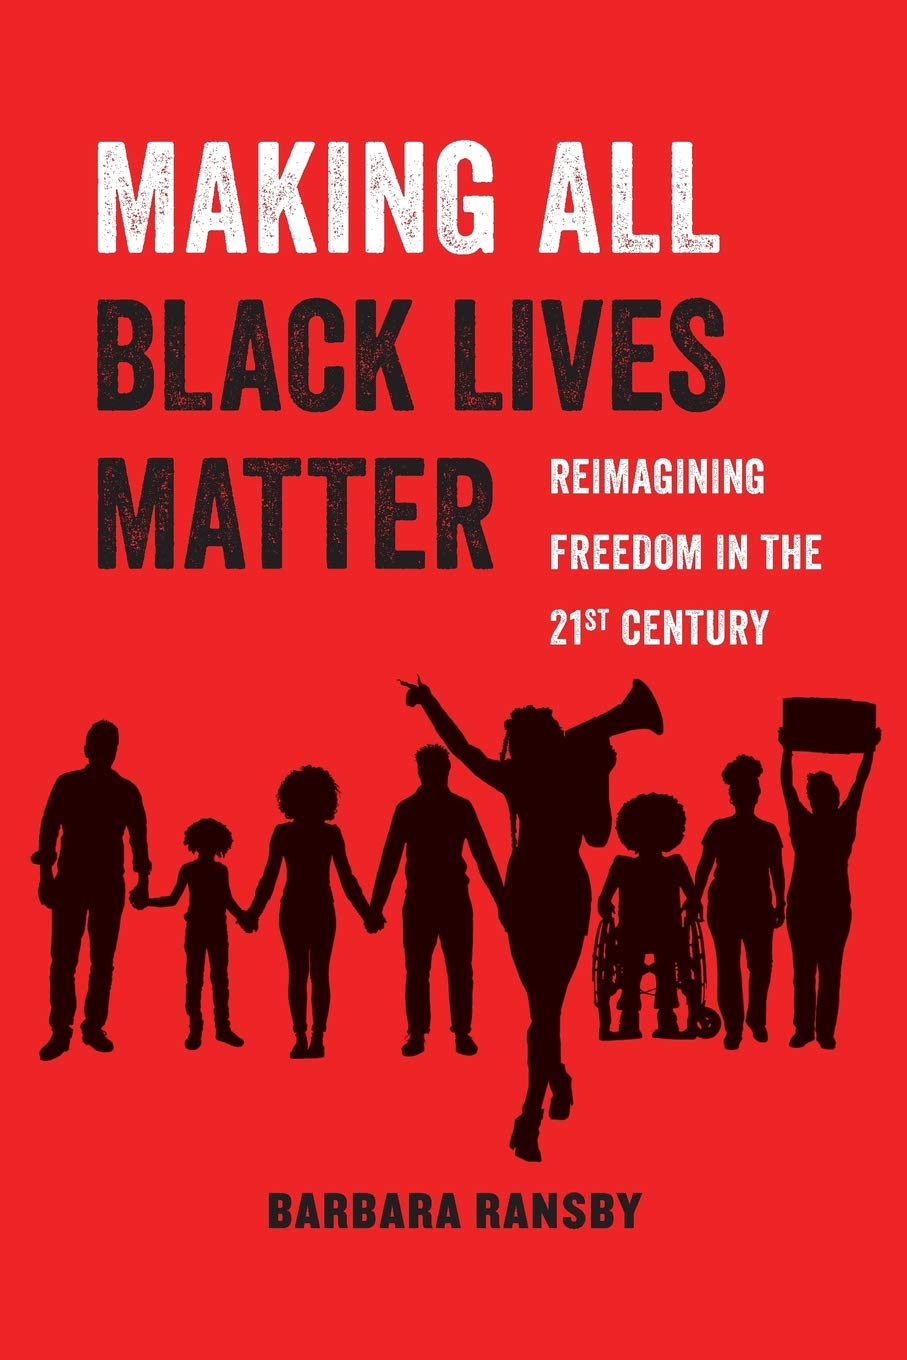 Image of the cover of Making All Black Lives Matter: Reimagining Freedom in the Twenty-First Century (Vol. 6) (University of California Press, 2018) by Barbara Ransby